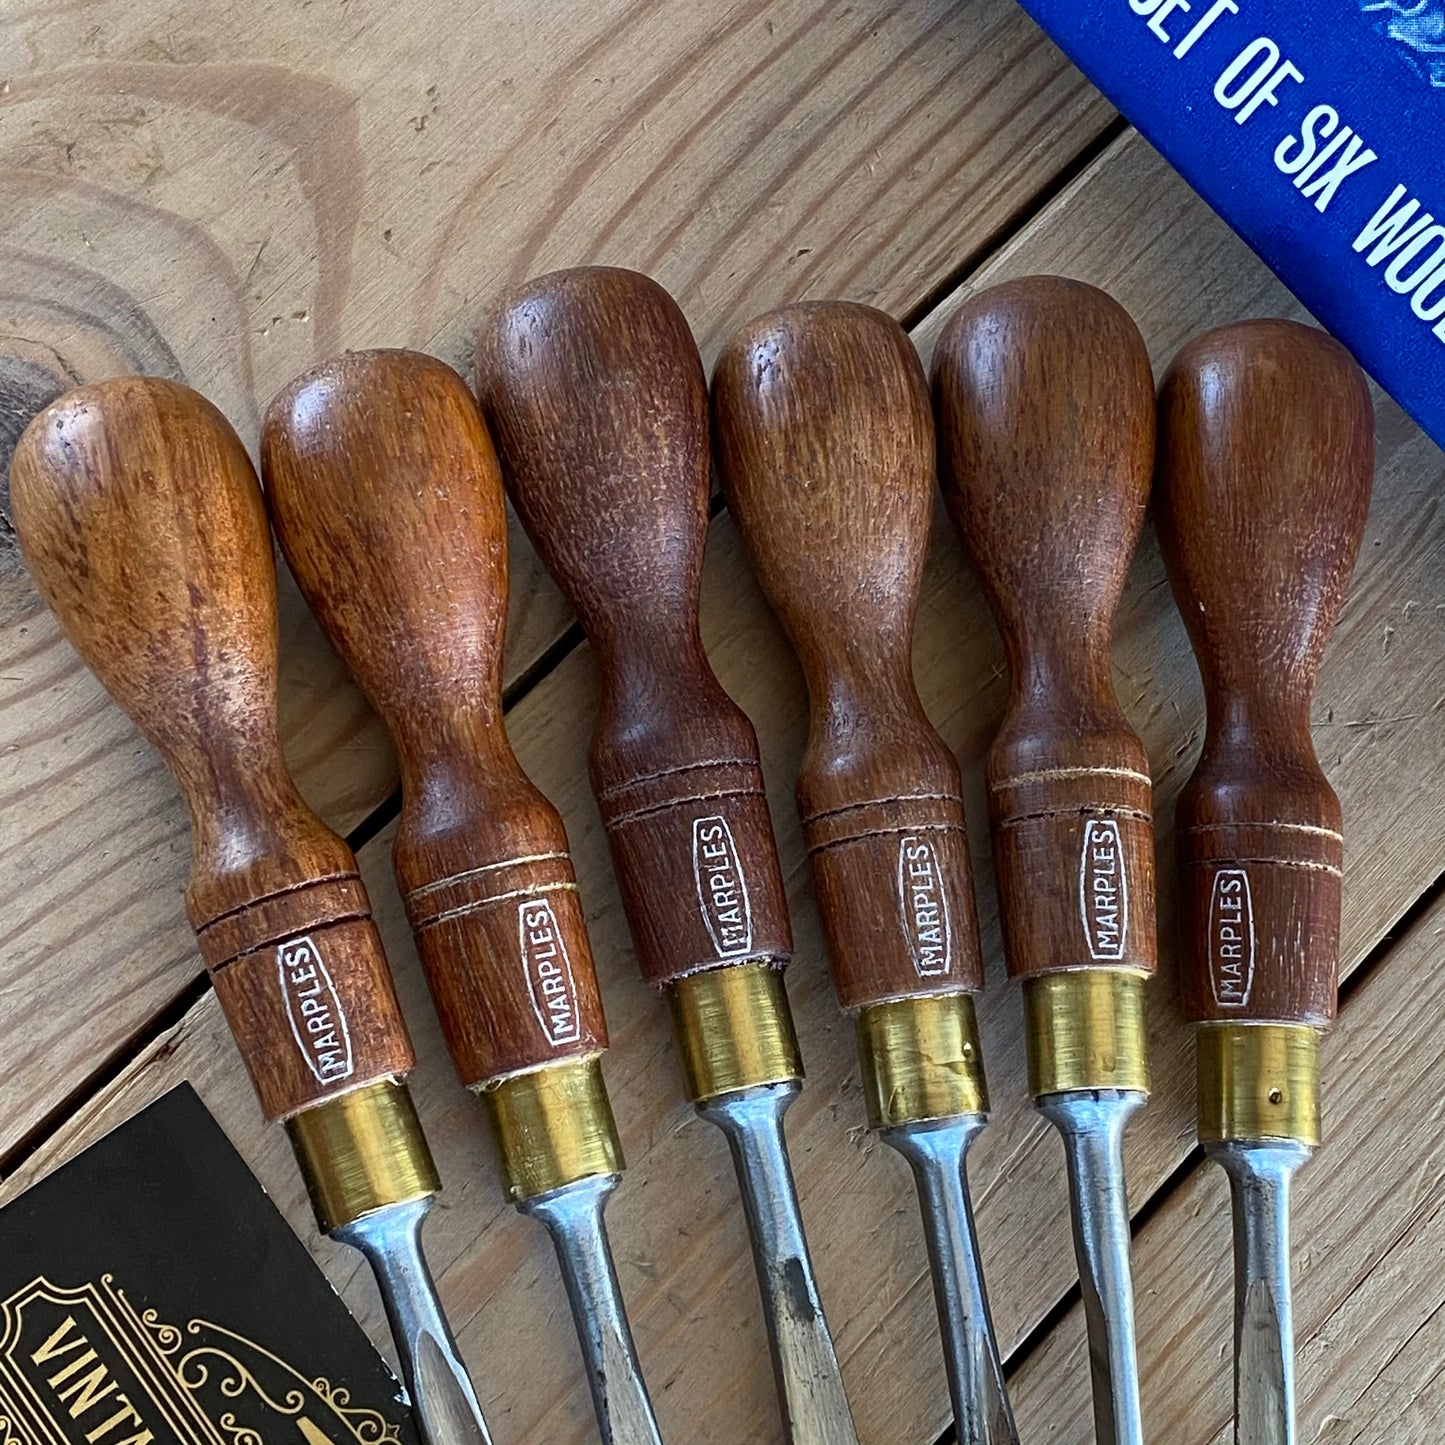 SOLD Vintage set of 6 RECORD MARPLES England Carving CHISELS No:152 unused in box T7817